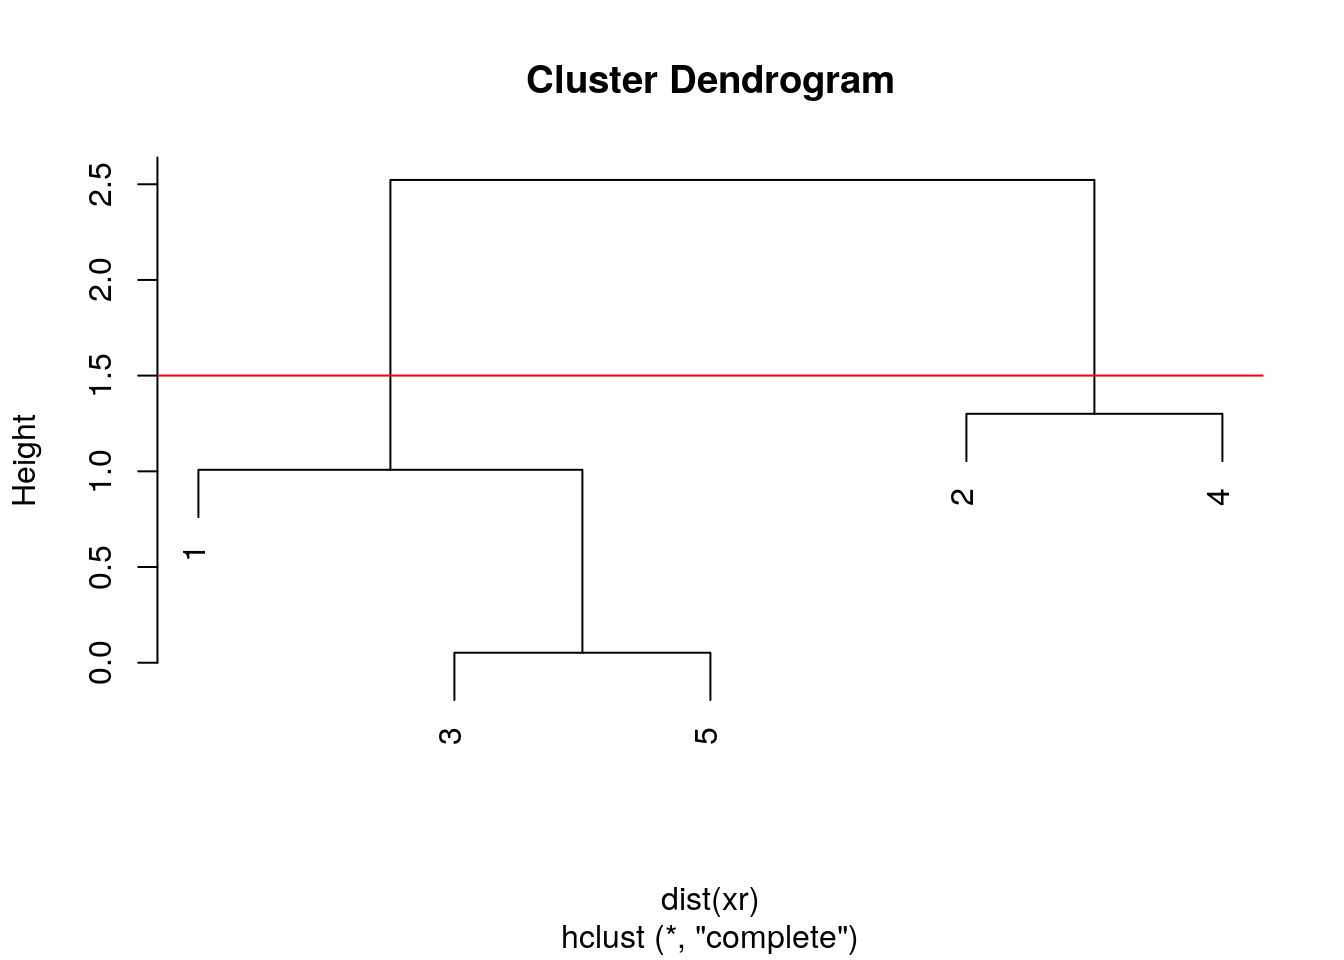 Cutting the dendrogram at height 1.5.